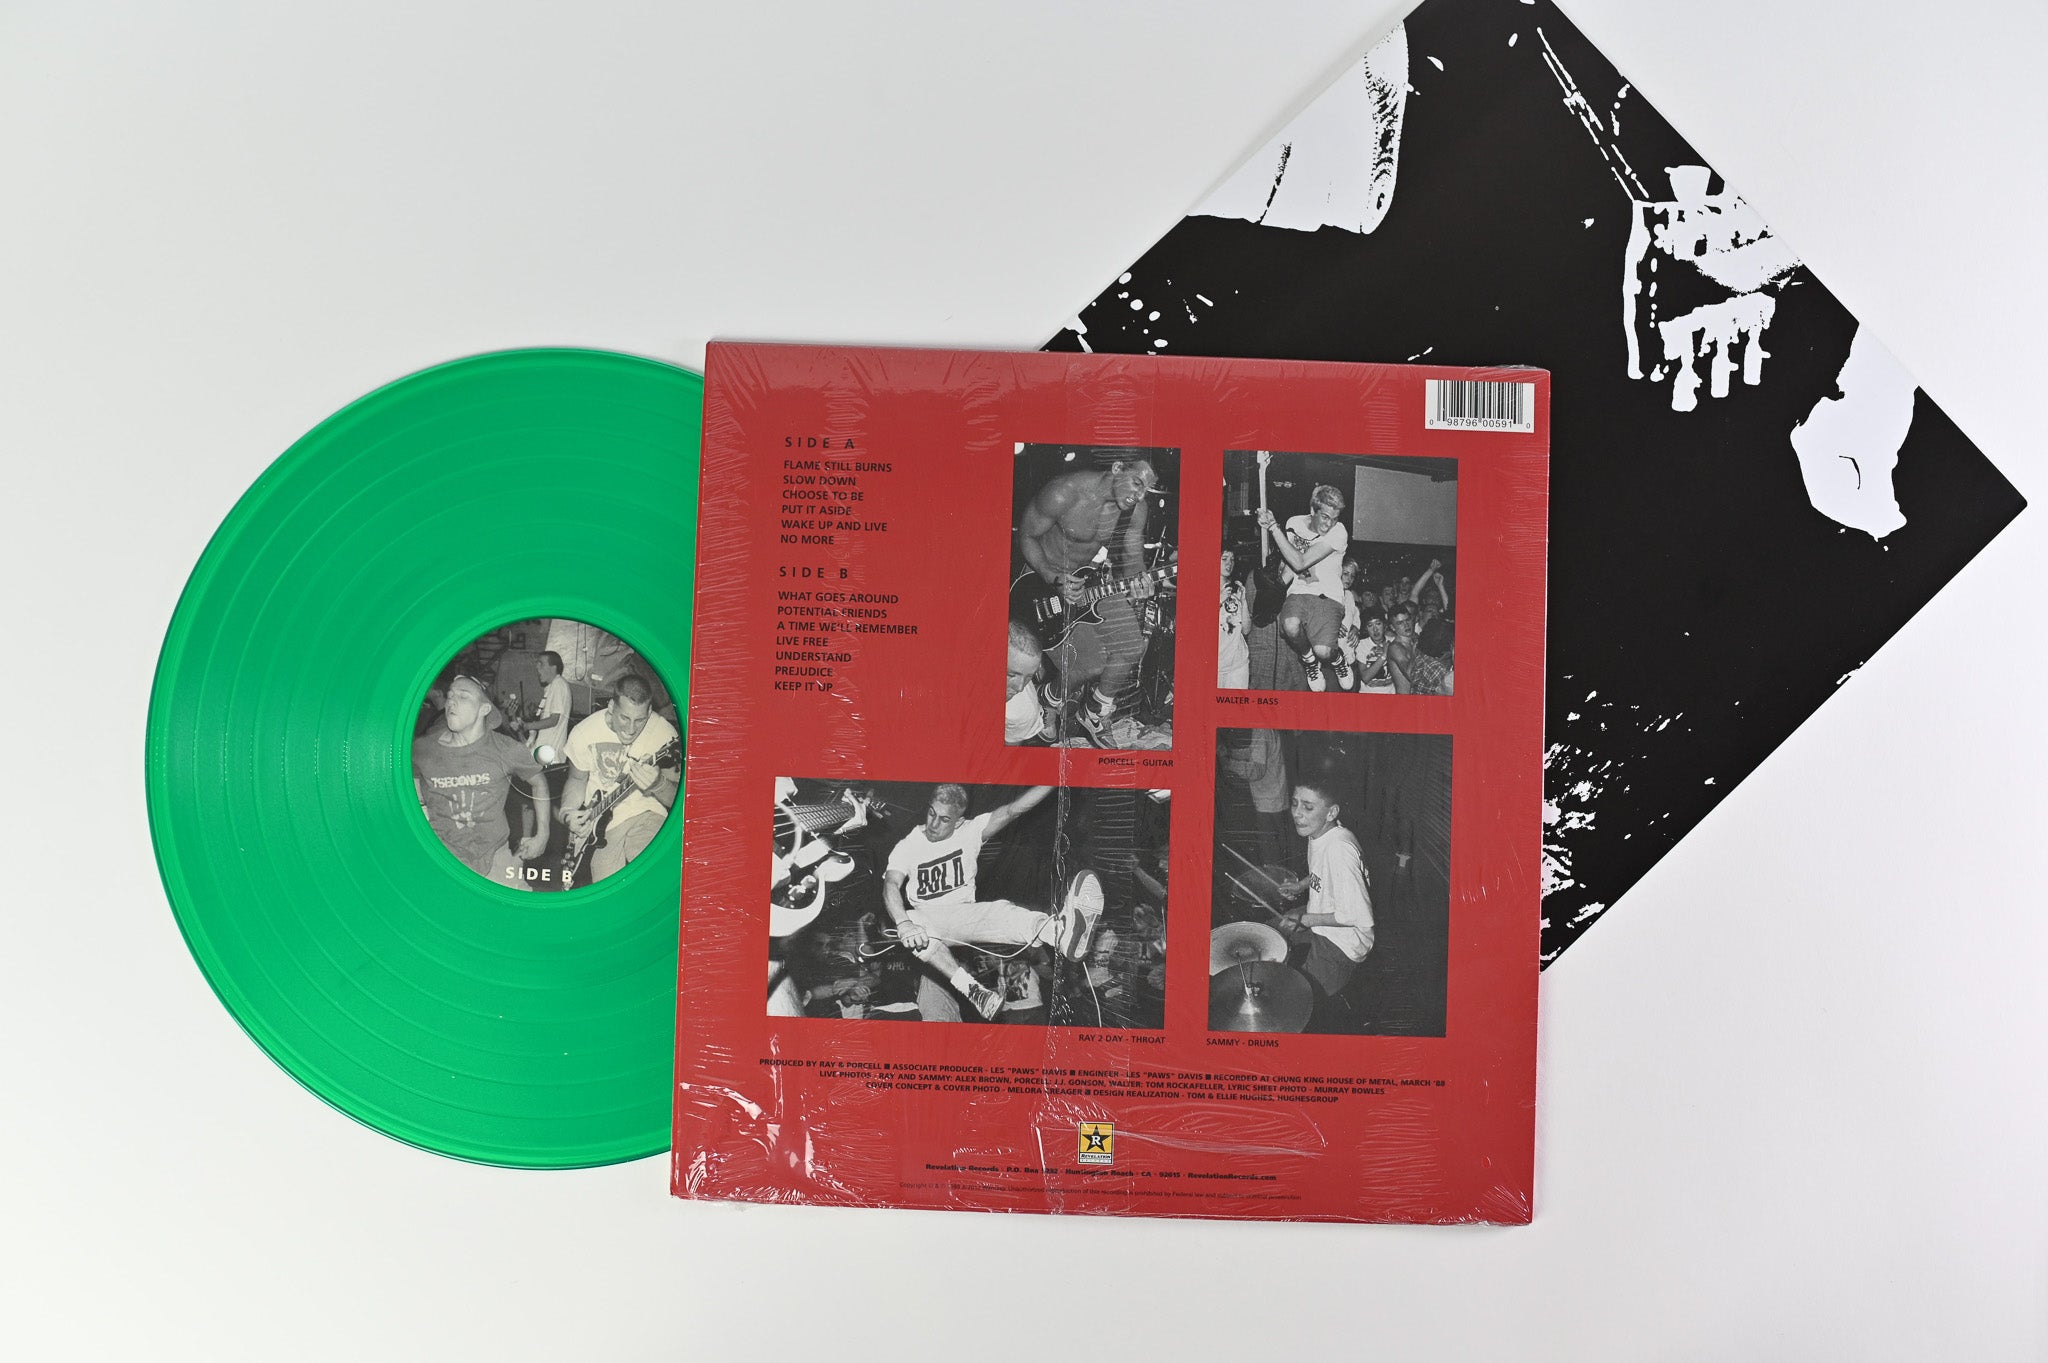 Youth Of Today - We're Not In This Alone on Revelation Records on Green Translucent Vinyl